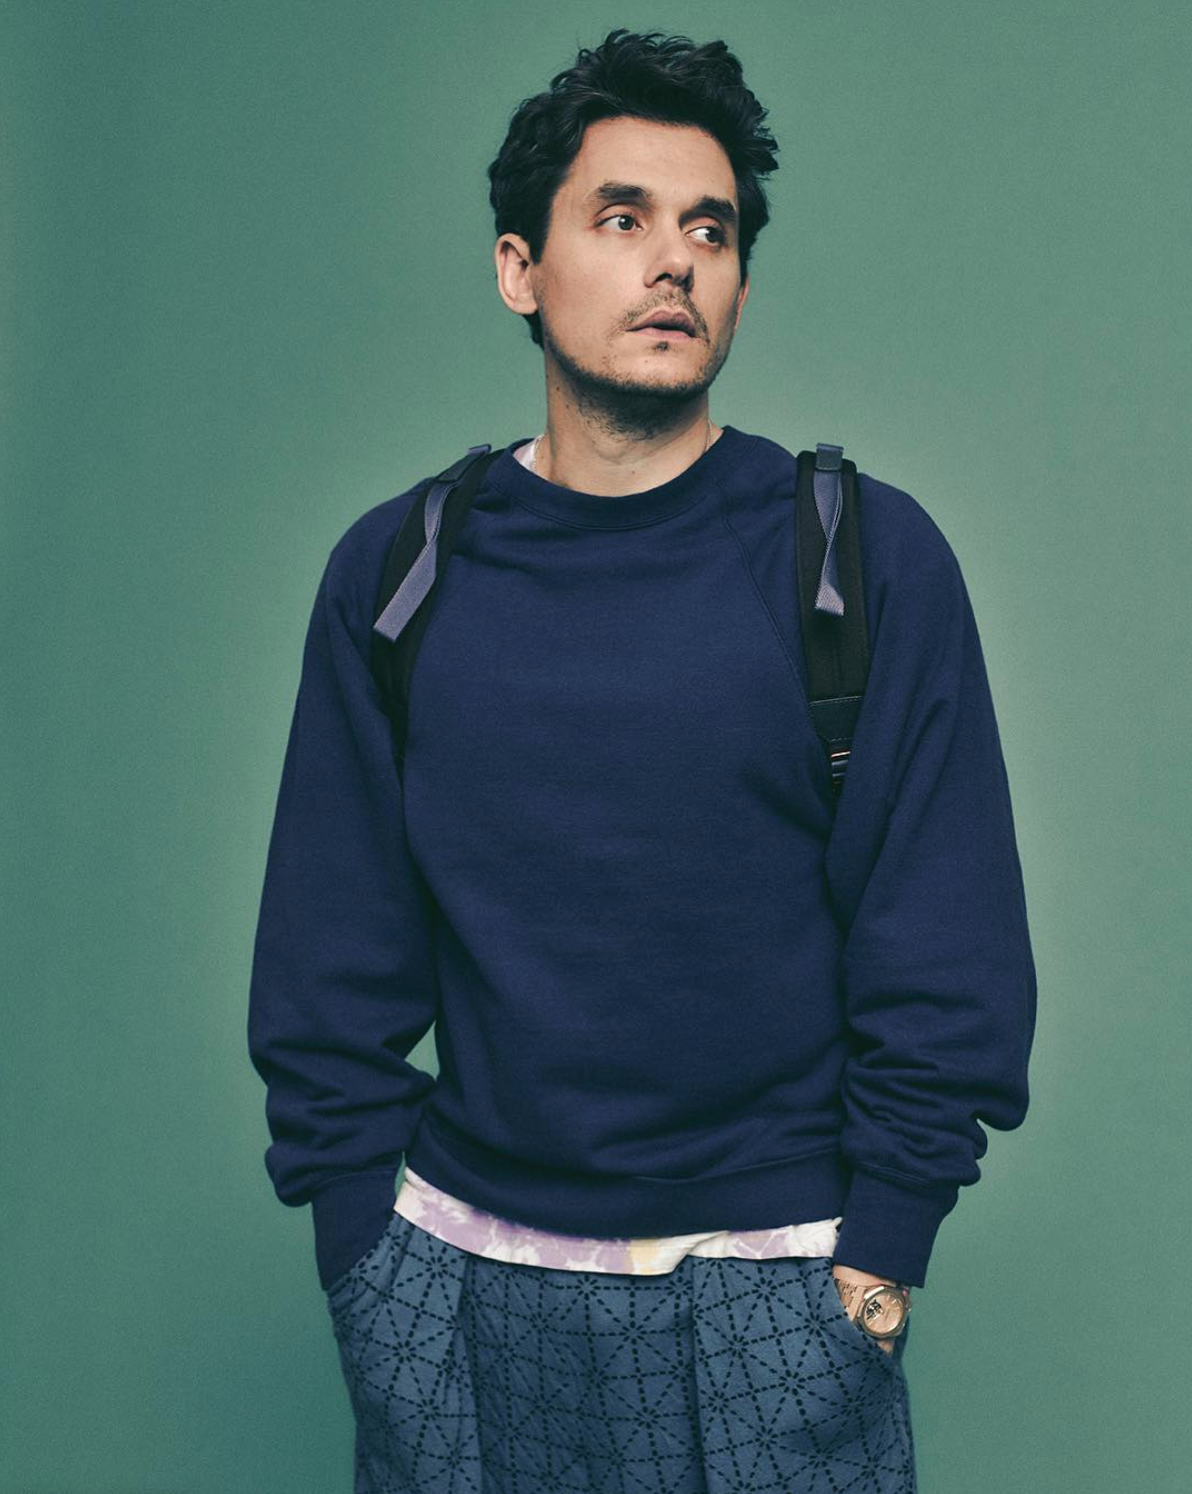 Recommended Reading: John Mayer's insane watch collection